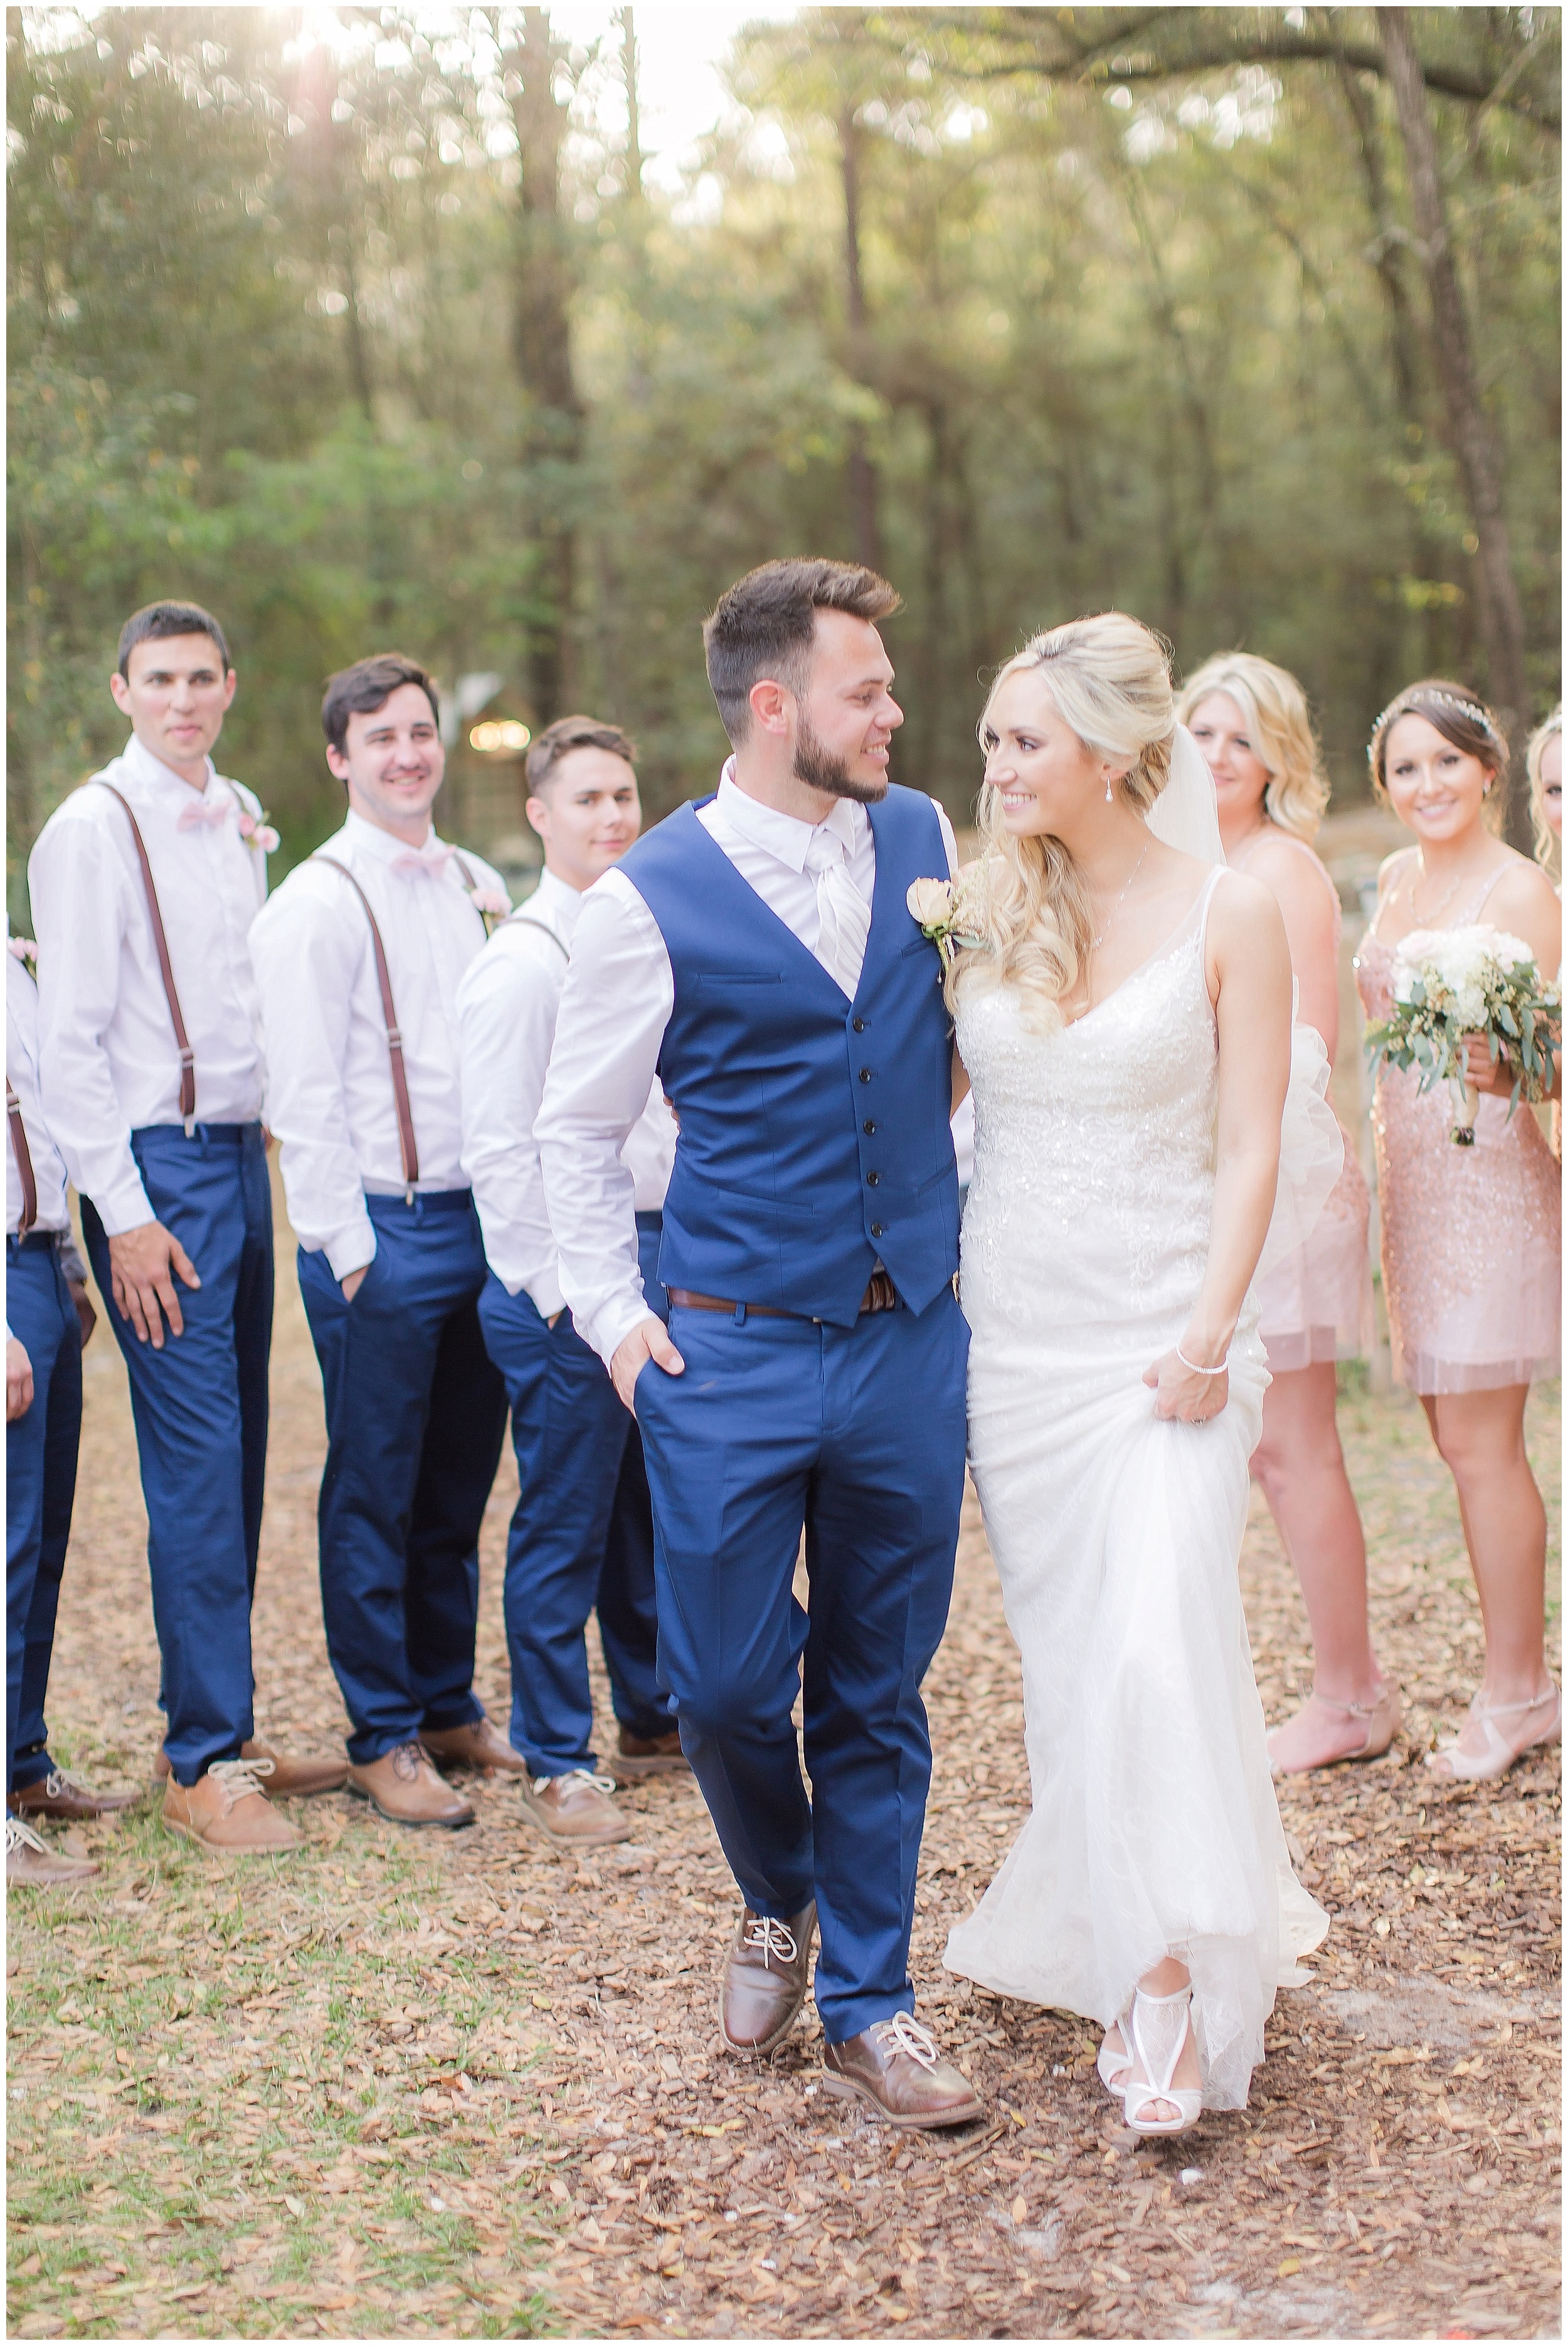 Bride and Groom with Bridal Party After Ceremony - Outdoor Rustic Wedding 